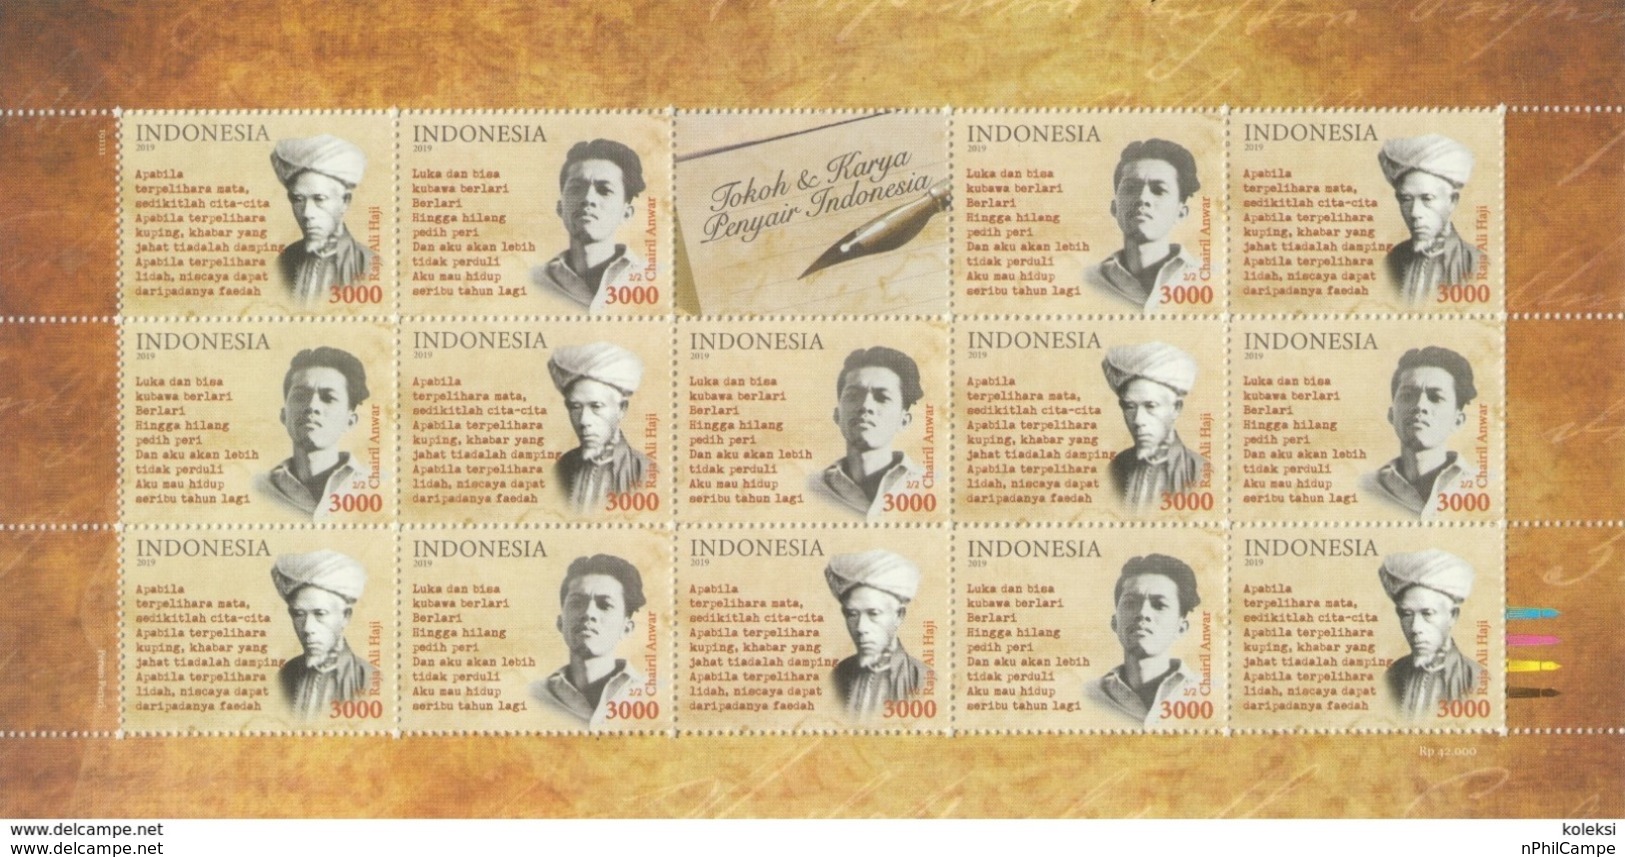 Indonesia 2019 - Indonesie Full Sheets Poets MNH - Indonesia